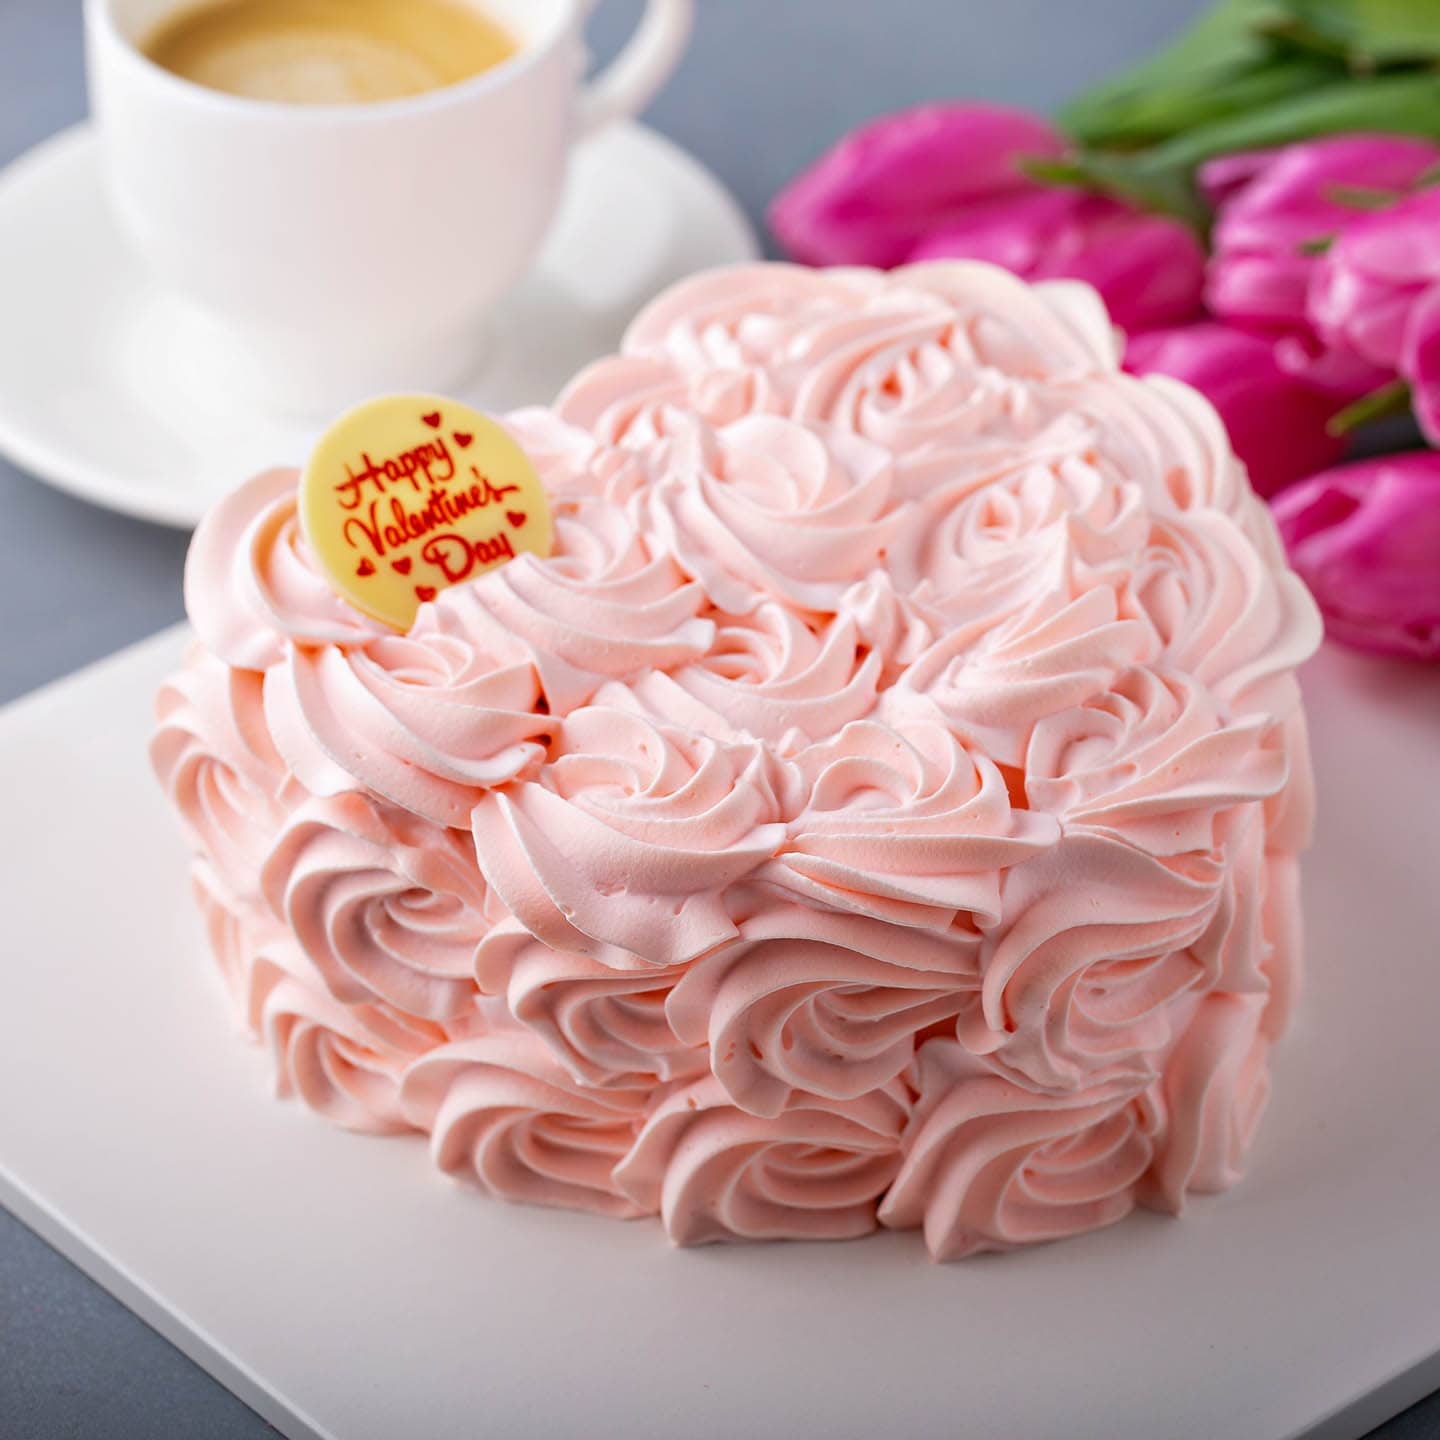 Send Two Heart Rose Cake to Guwahati online with Petalscart